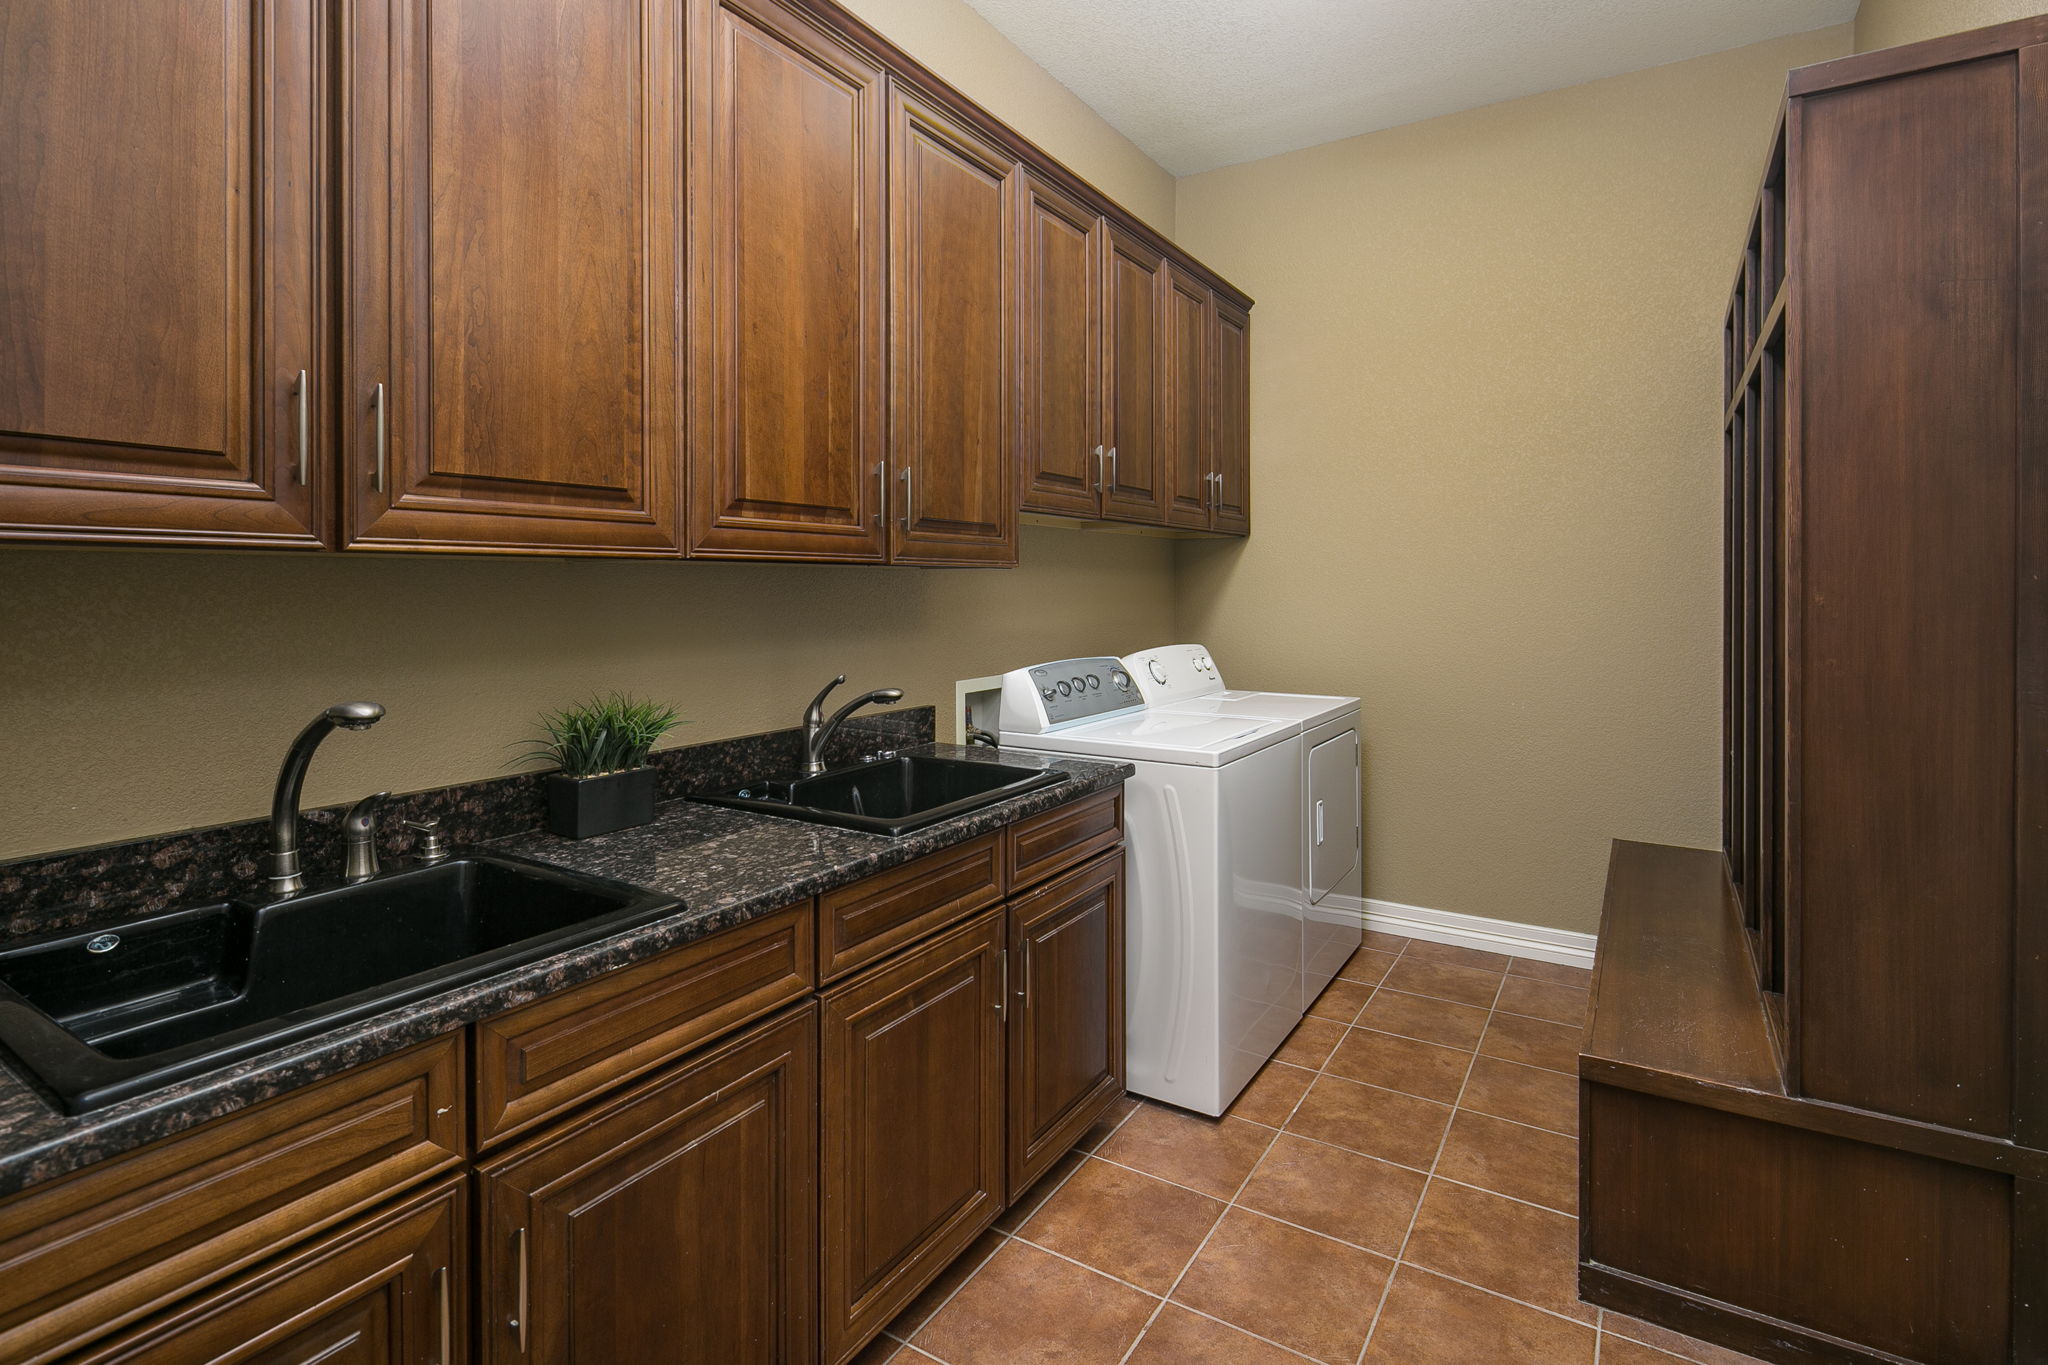 Main Level Laundry Features Dual Sinks and Tons of Storage